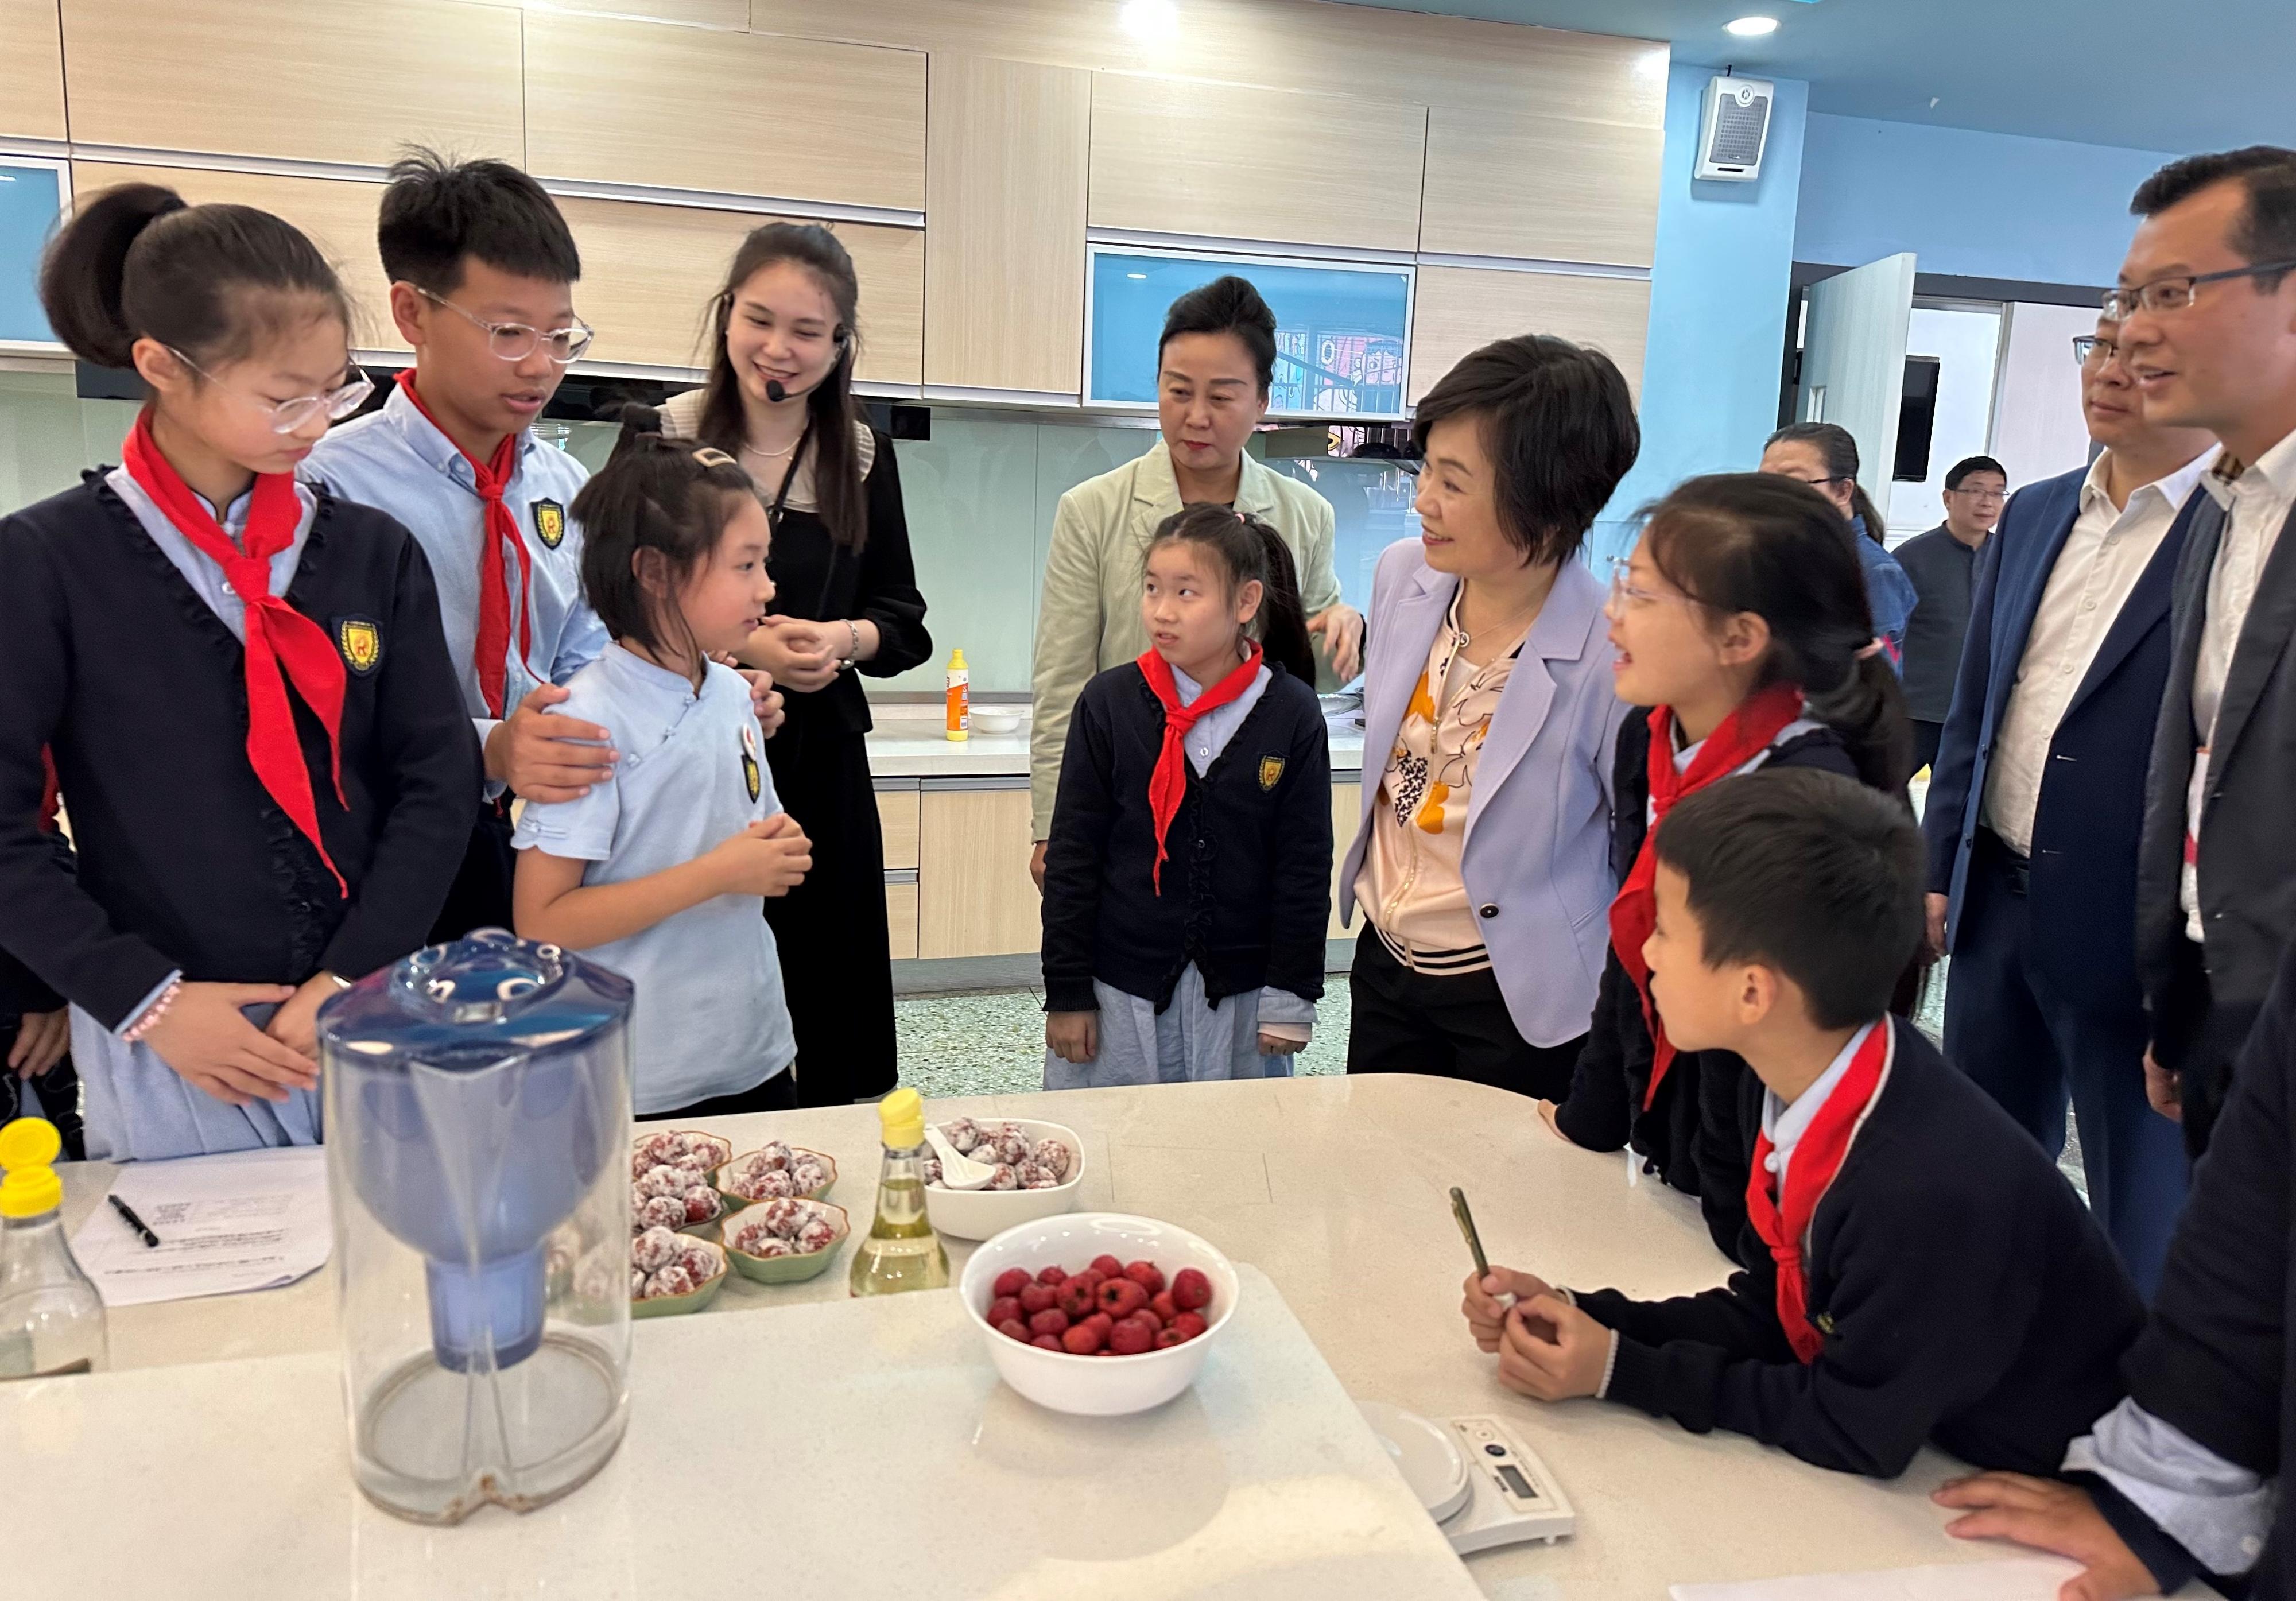 The Secretary for Education, Dr Choi Yuk-lin (seventh left), visits Chongqing Renmin Primary School in Chongqing today (April 27) to learn about the education philosophy and practices of local primary schools.